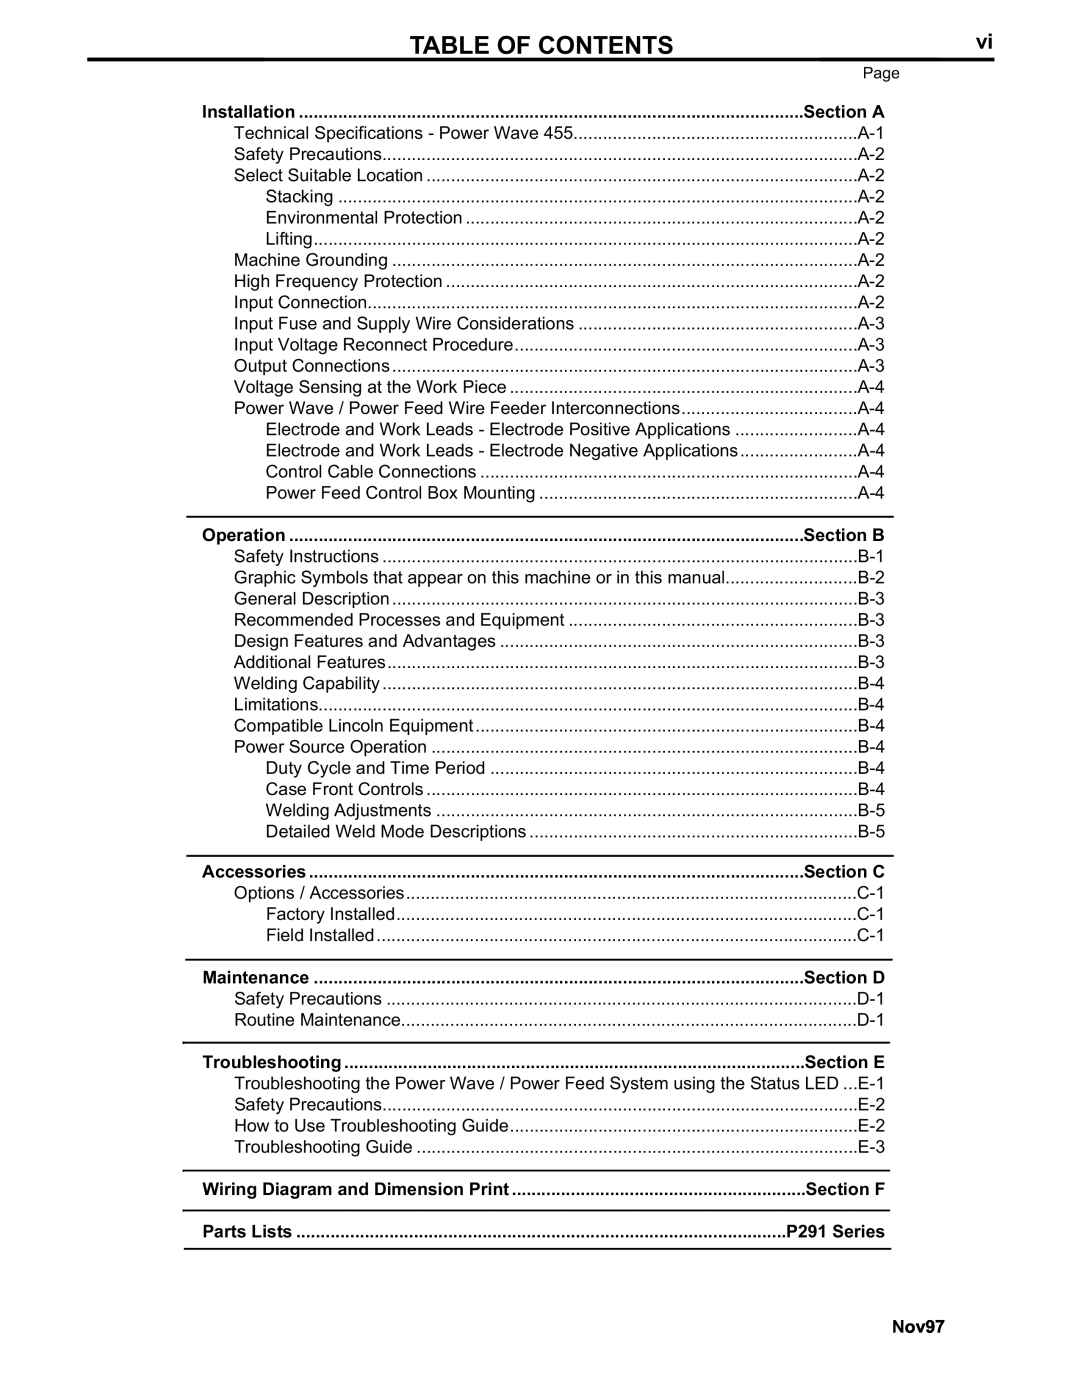 Lincoln Electric IM583-A Table Of Contents, Section A, Section B, Section C, Section D, Section E, Section F, P291 Series 